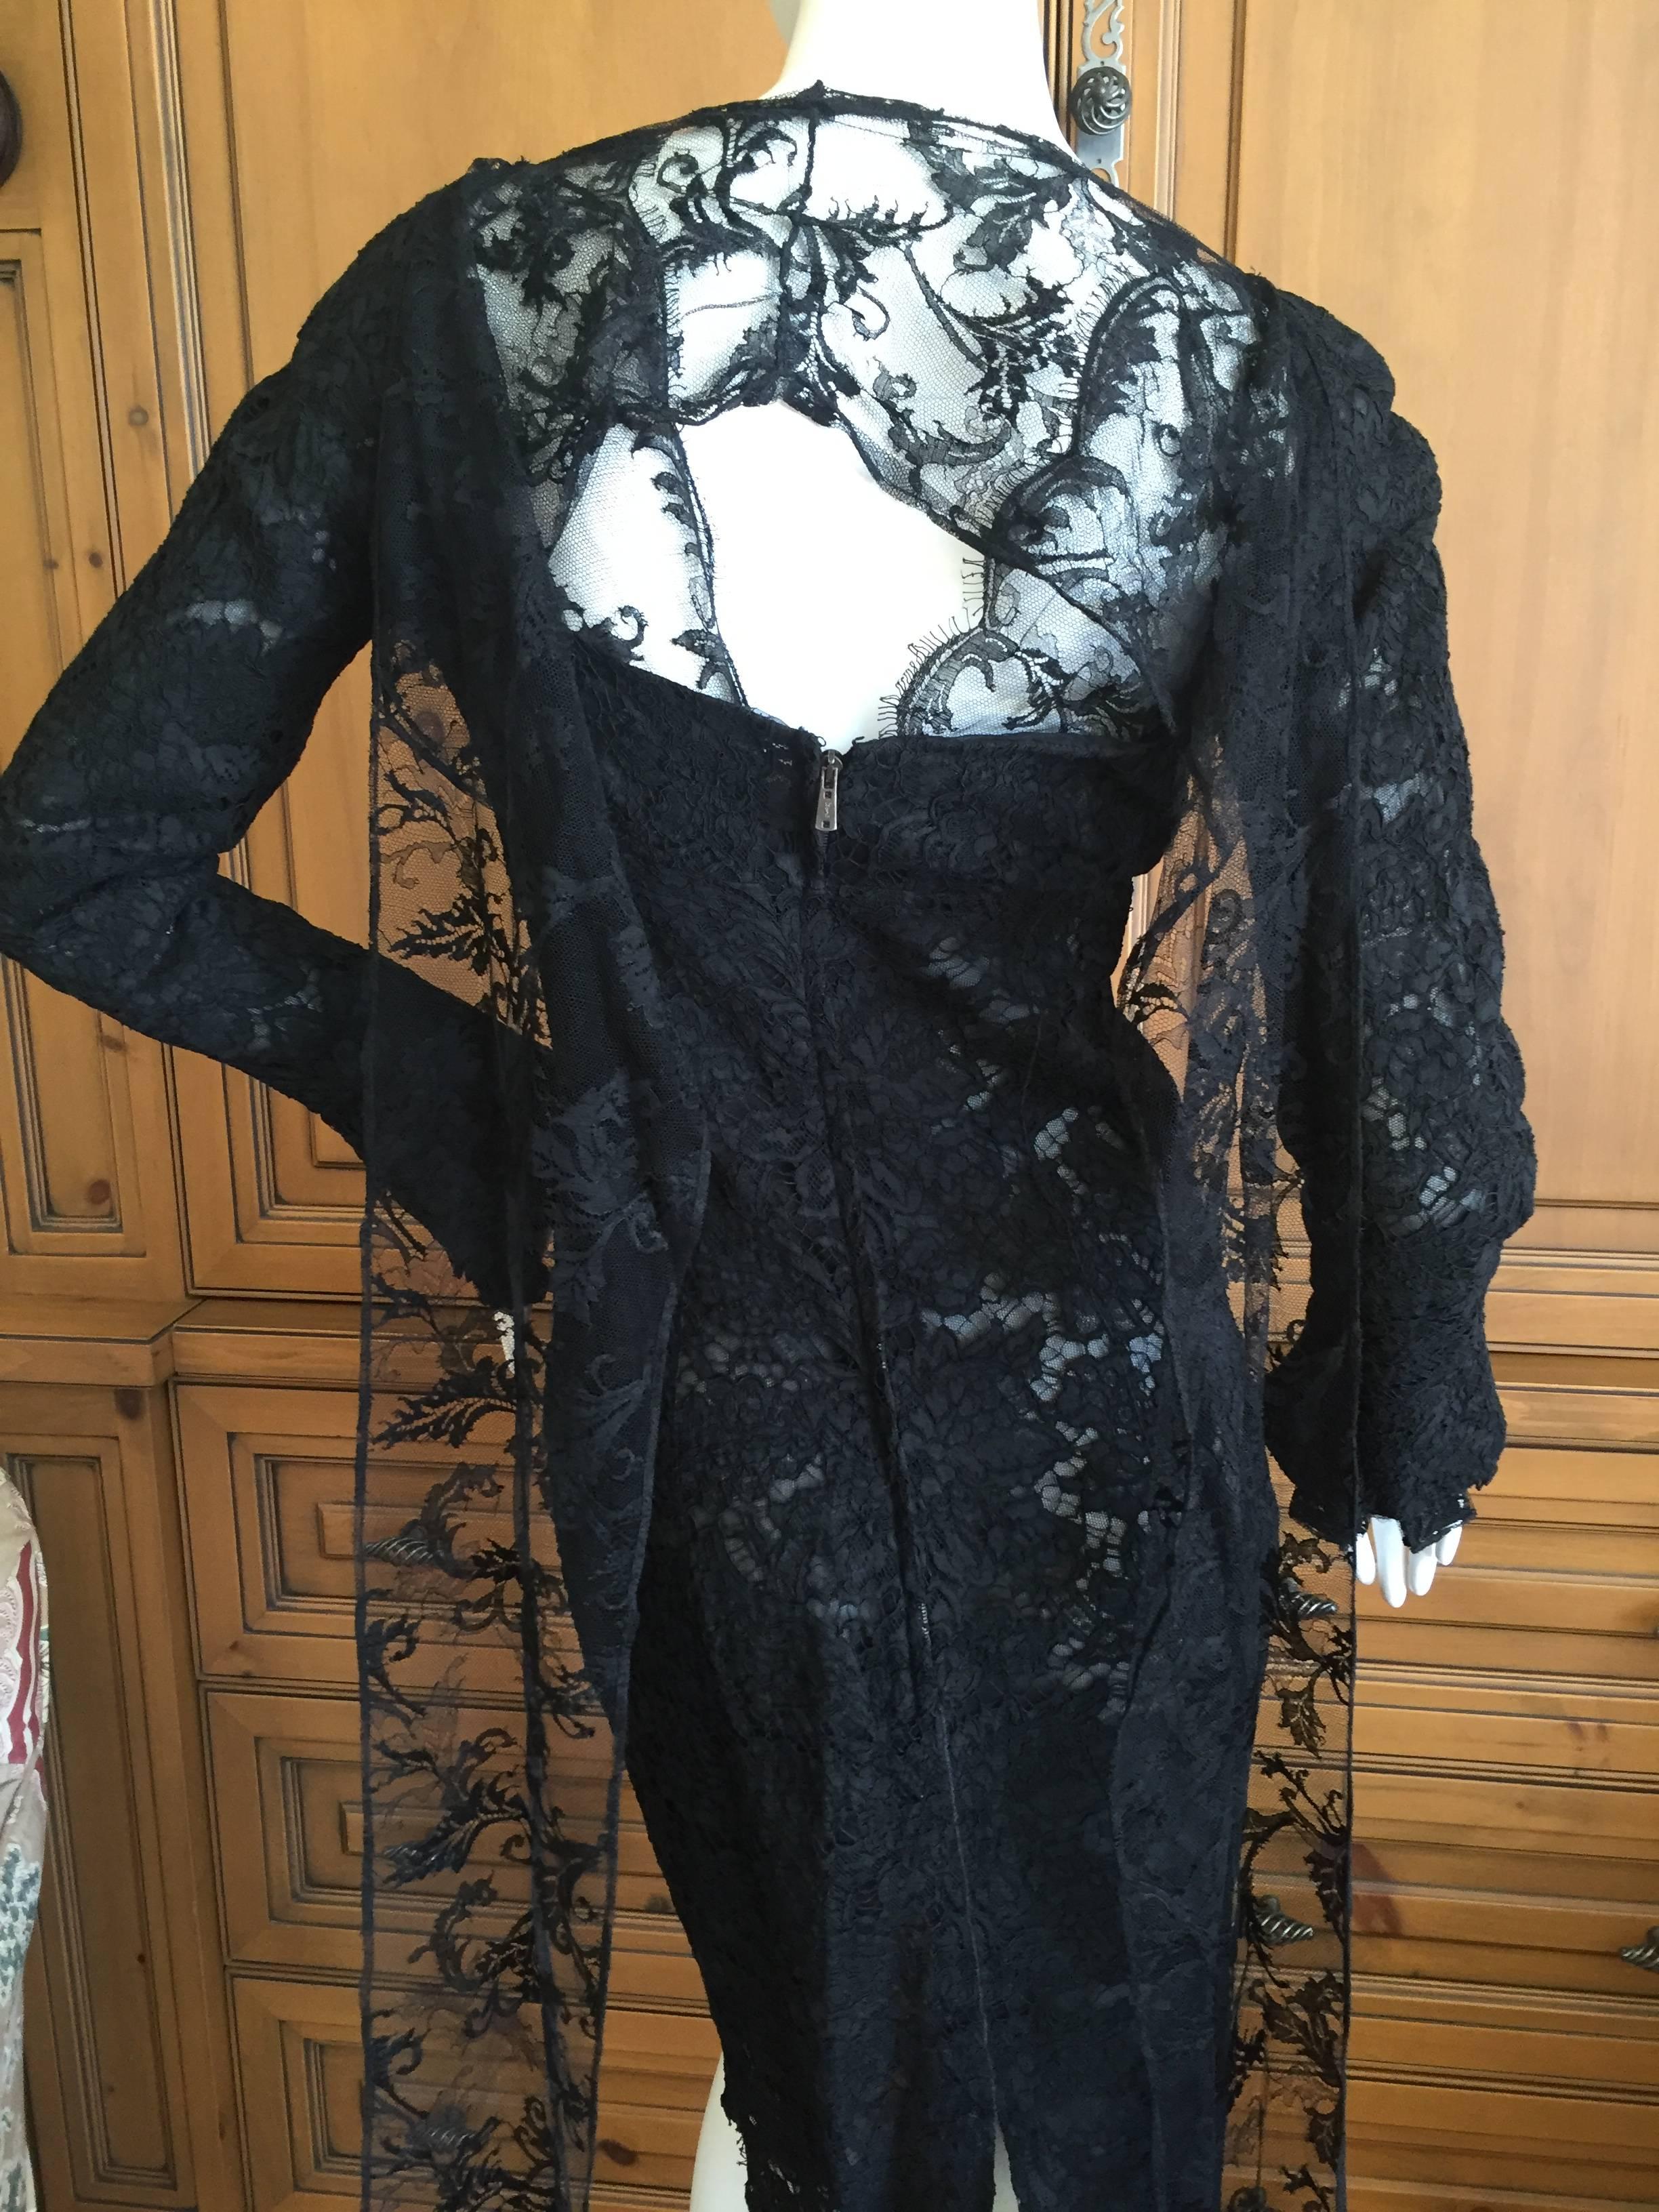 Yves Saint Laurent by Tom Ford Black Lace Cocktail Dress with Scarf Ties For Sale 2